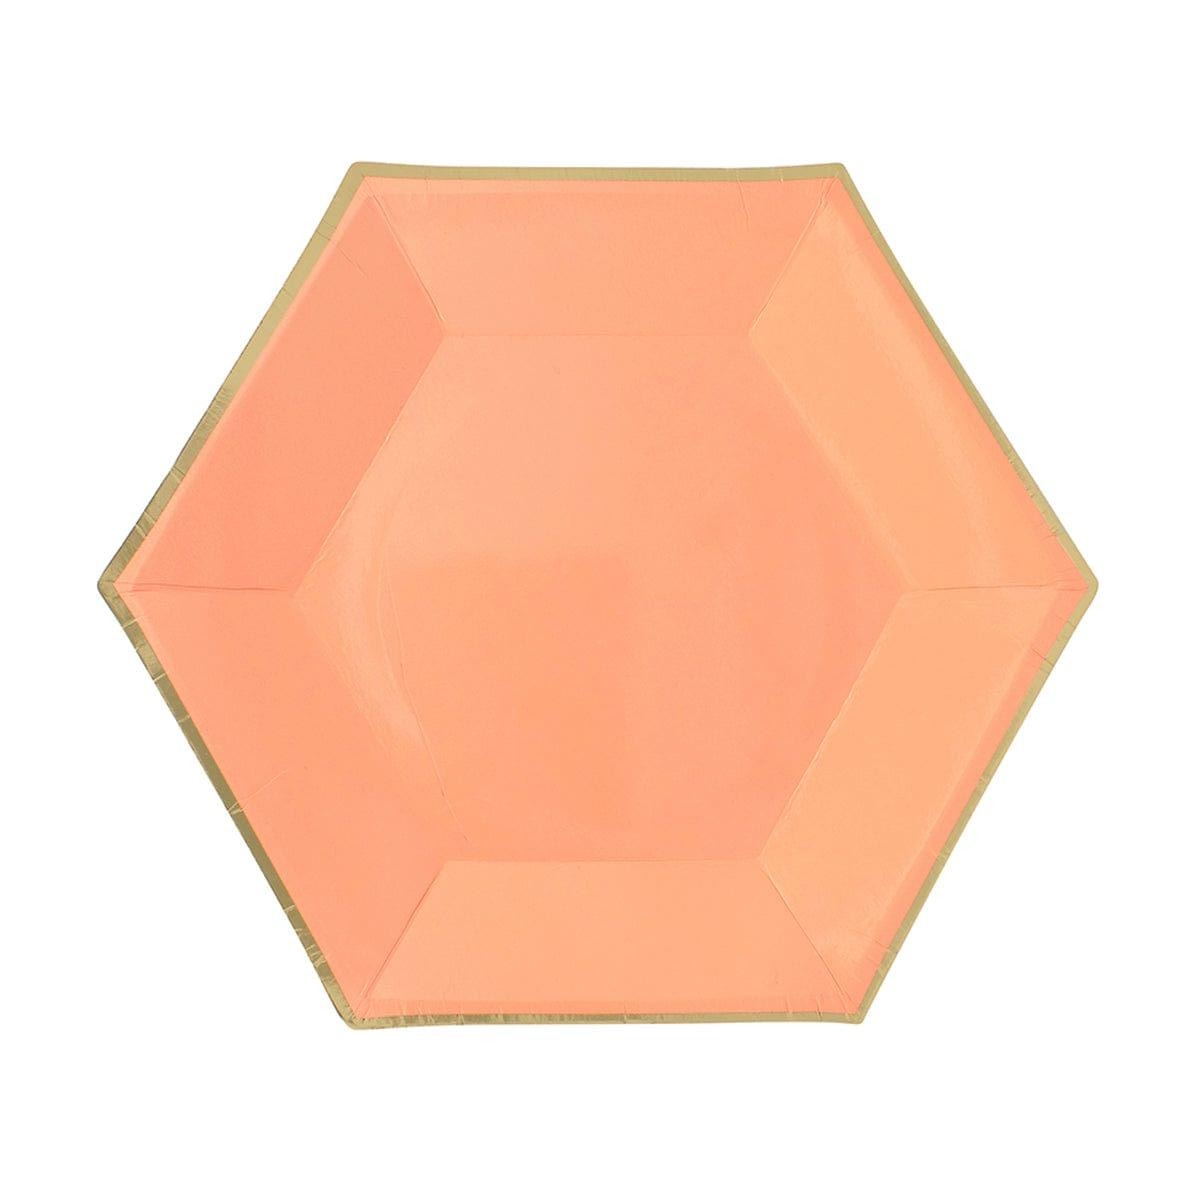 YIWU SANDY PAPER PRODUCTS CO., LTD Everyday Entertaining Hexagon Orange Plates, 9 Inches, 8 Count